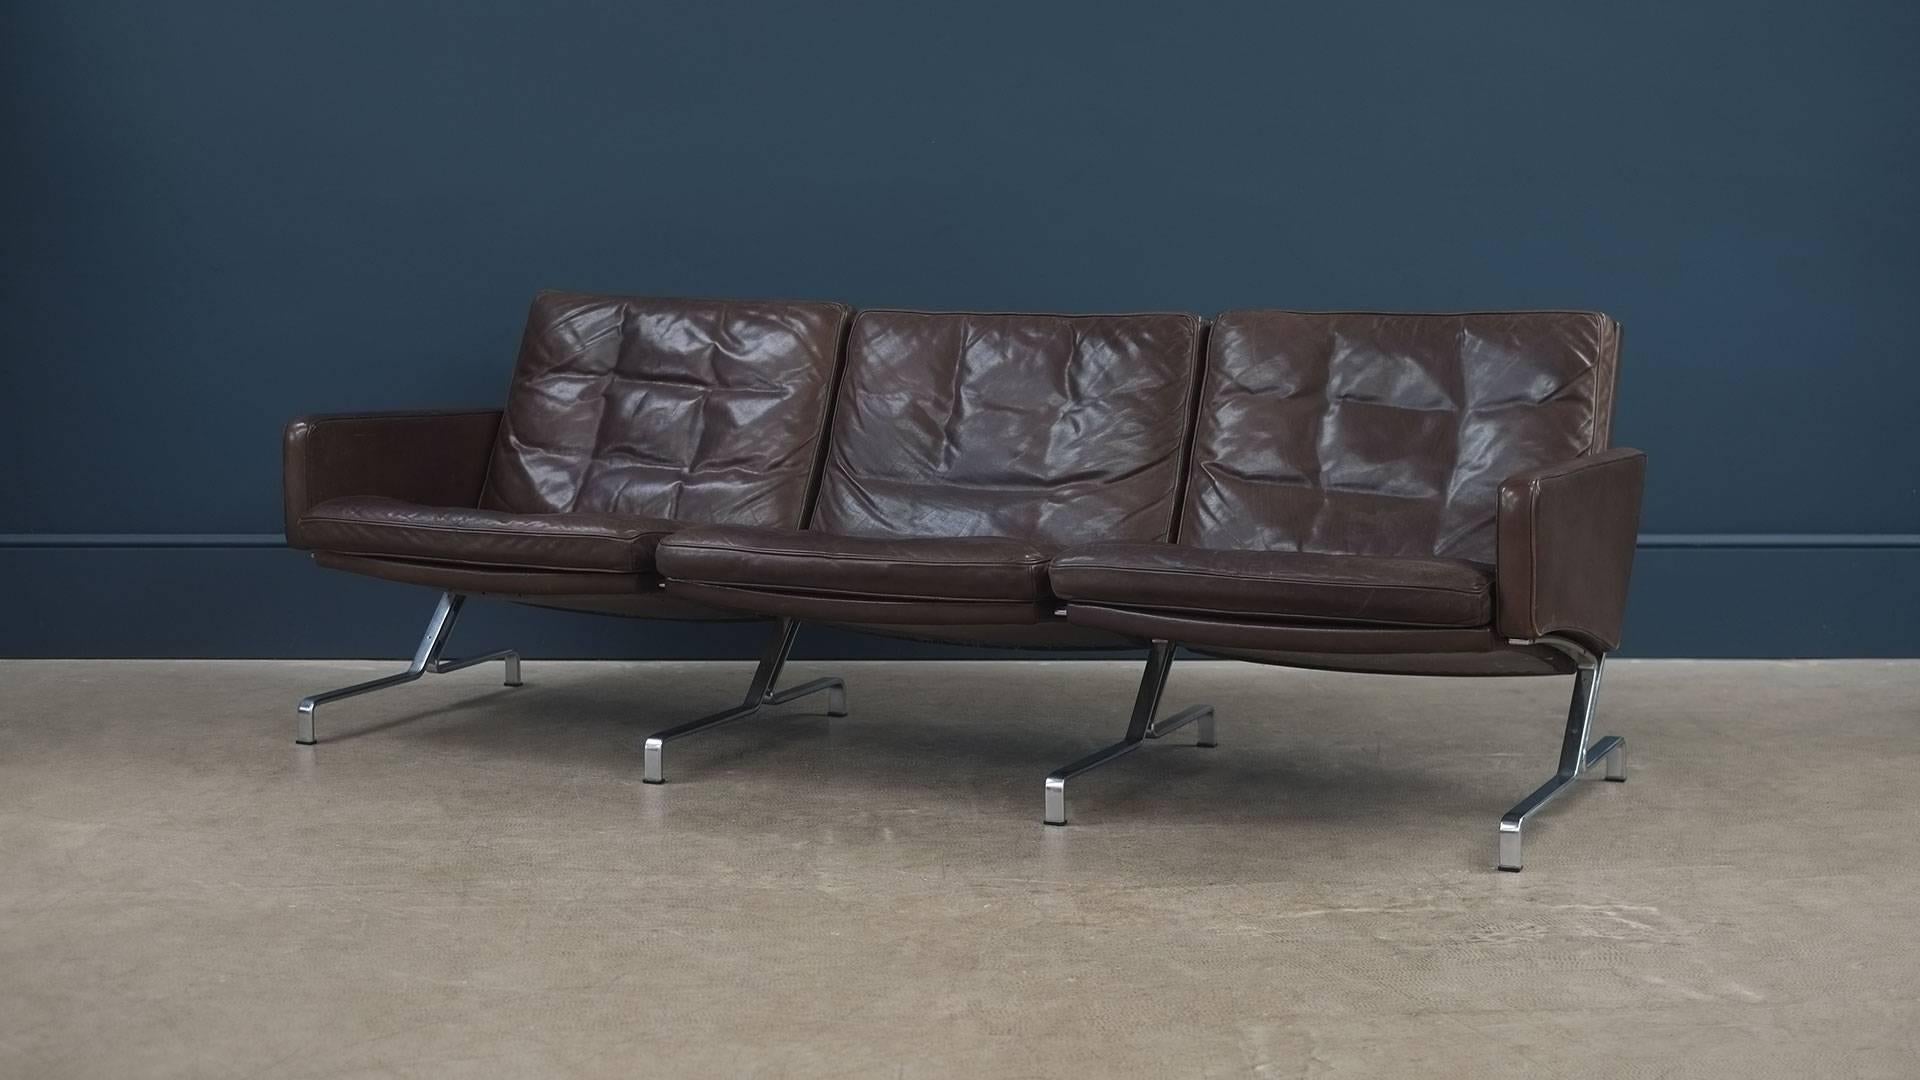 Amazing and very rare architectural sofa in steel and leather designed by Jorgen Kastholm for Alfred Kill, 1965. Super elegant and comfortable sofa with perfect patina. Staggering leather.